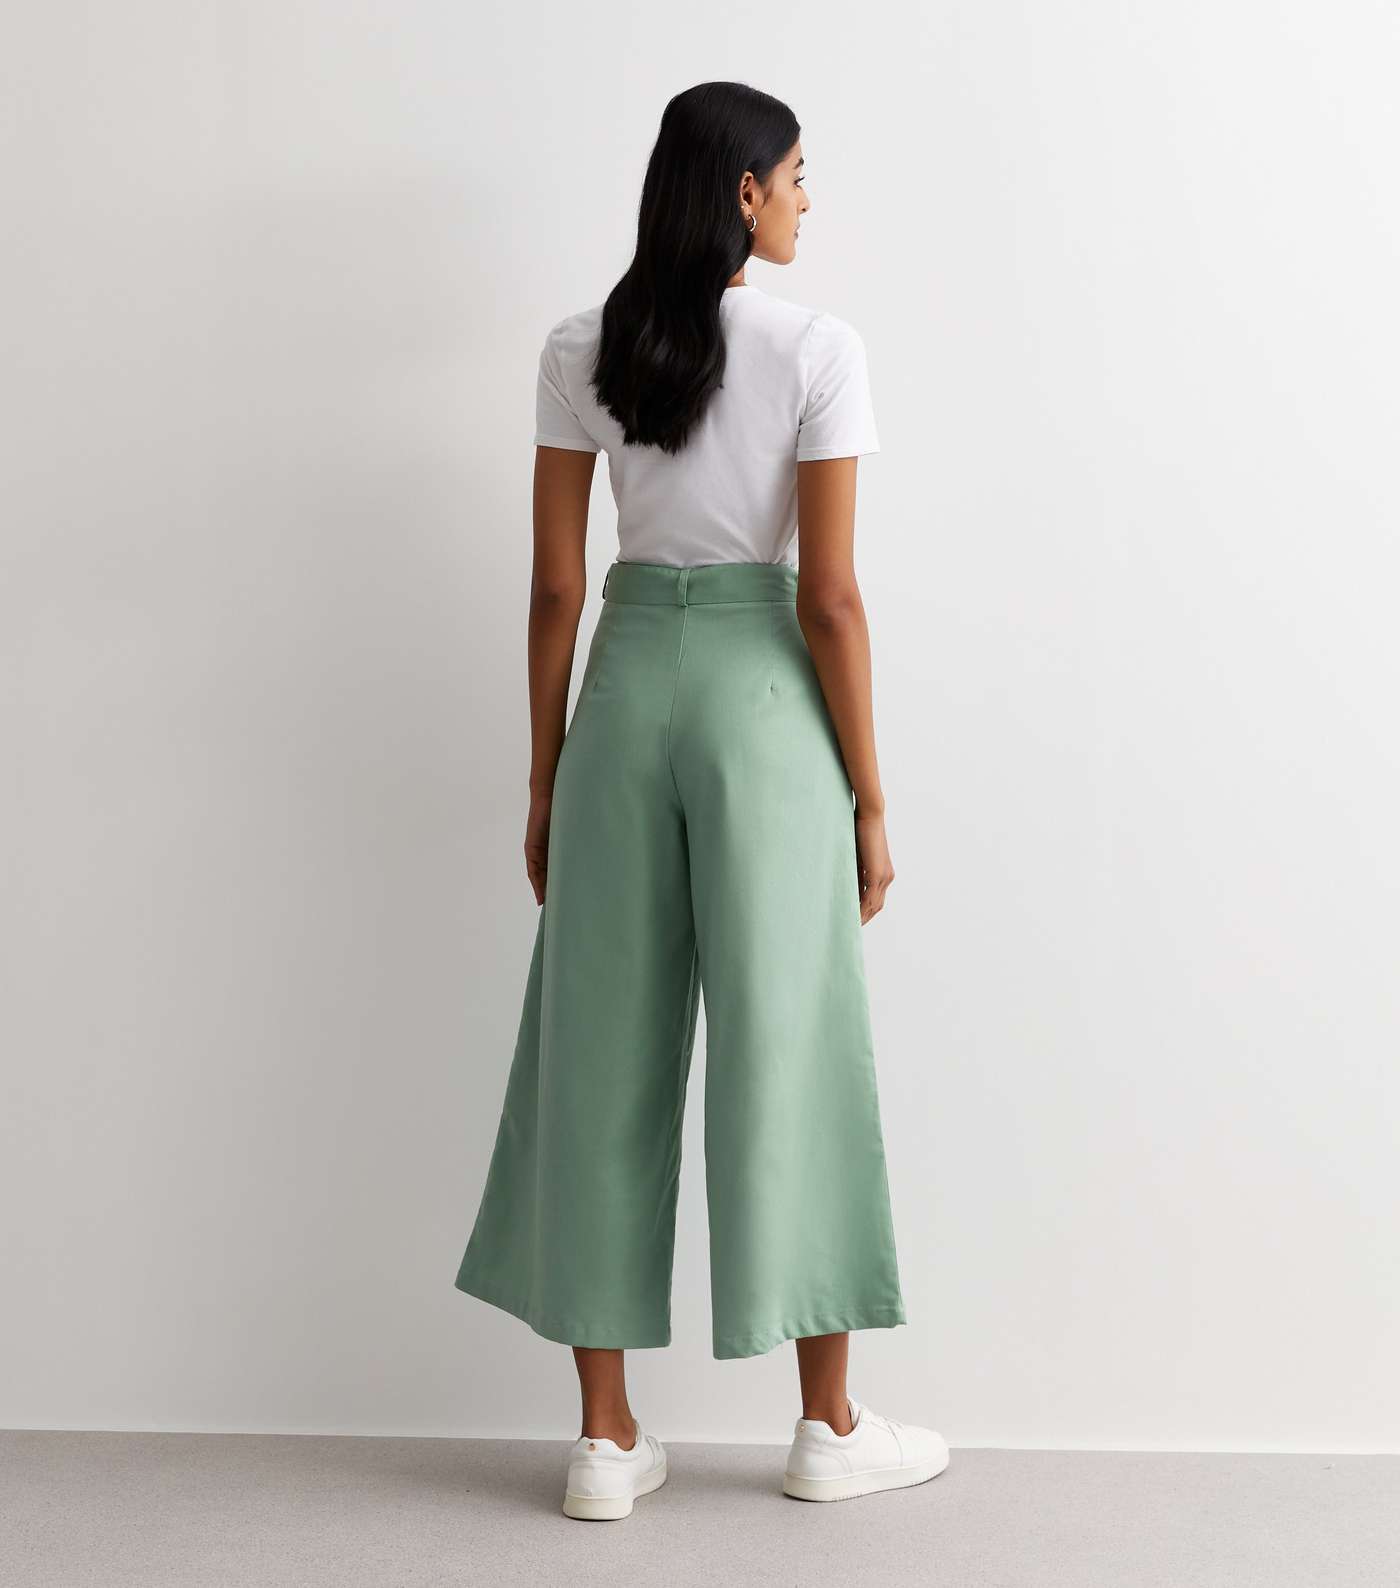 Gini London Green Linen-Look Belted Wide Leg Trousers Image 4